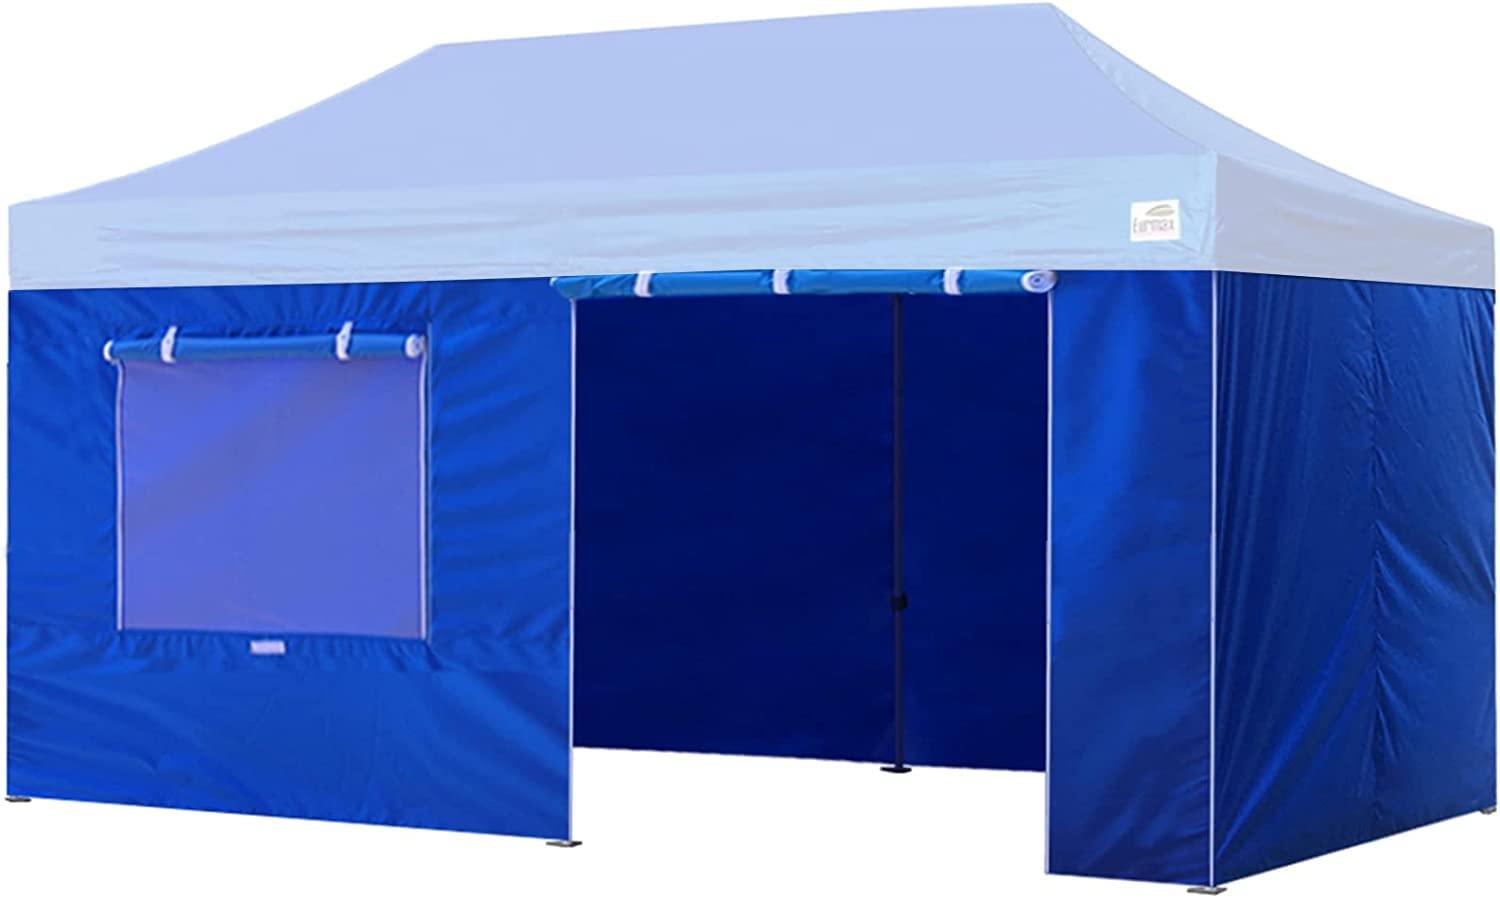 Eurmax Usa Full Zippered Walls For 10 X 20 Easy Pop Up Canopy Tent,Enclosure Sidewall Kit With Roller Up Mesh Window And Door 4